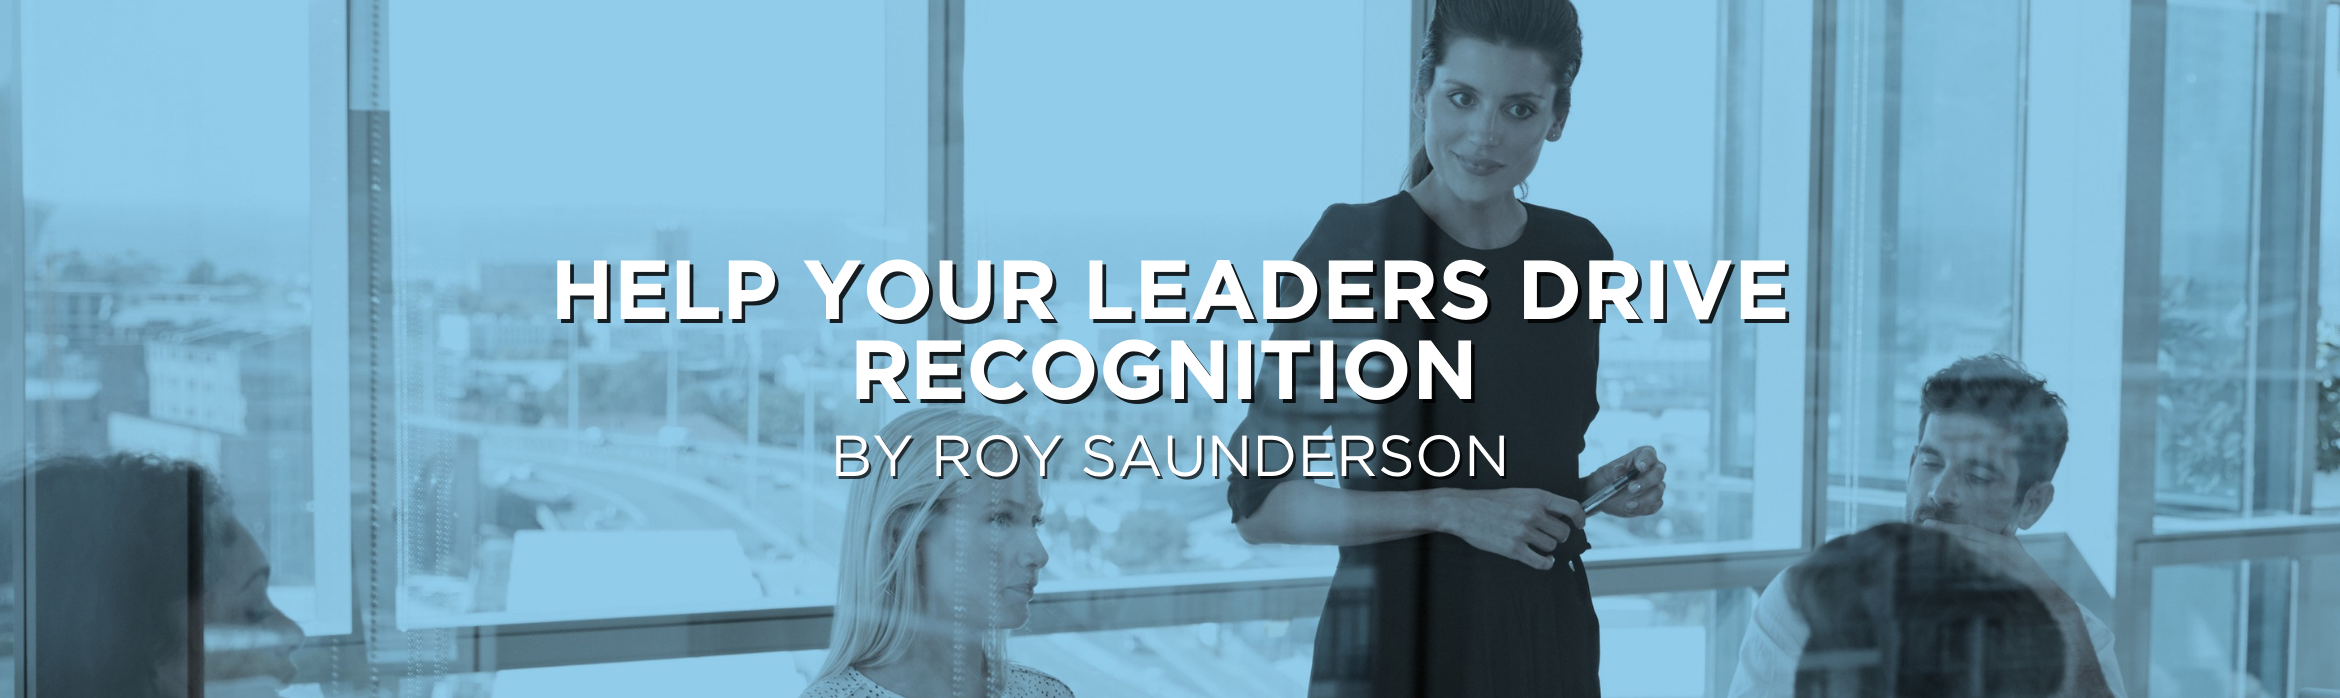 Help Your Leaders Drive Recognition